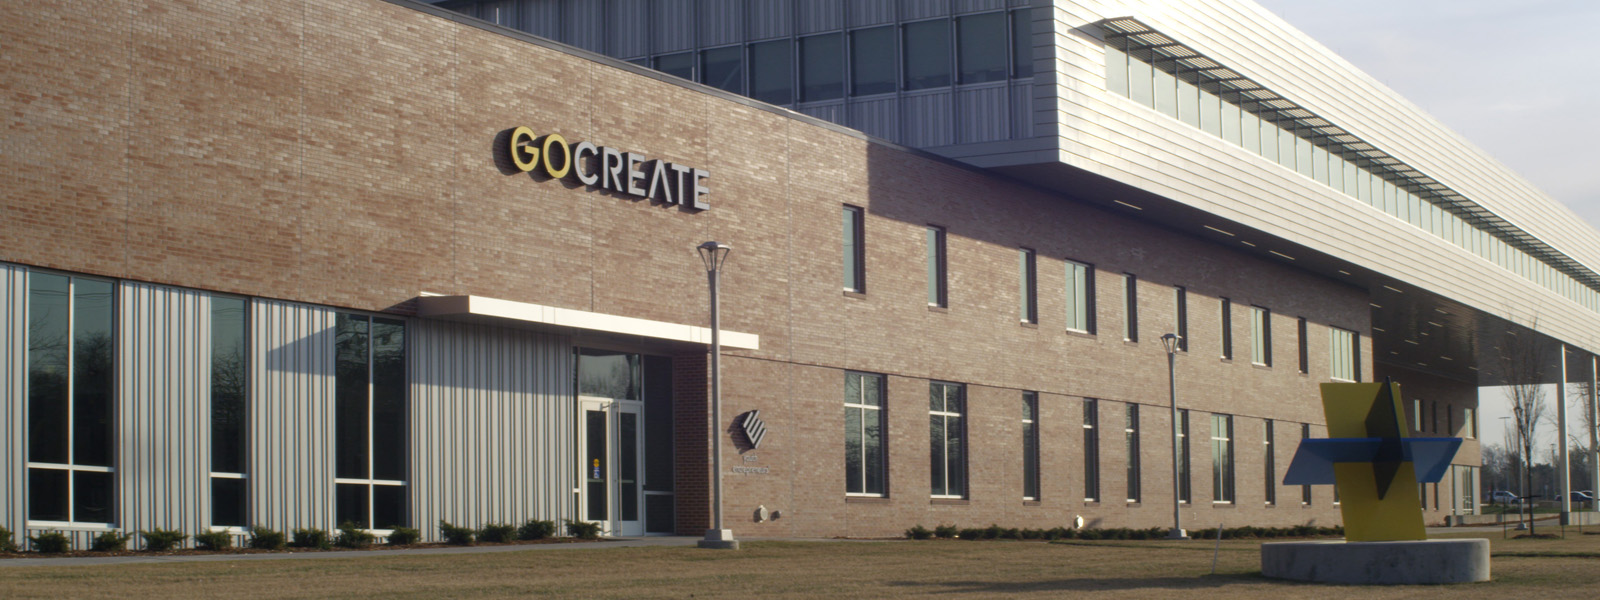 GoCreate, Youth Entrepreneurs to hold public grand opening Saturday